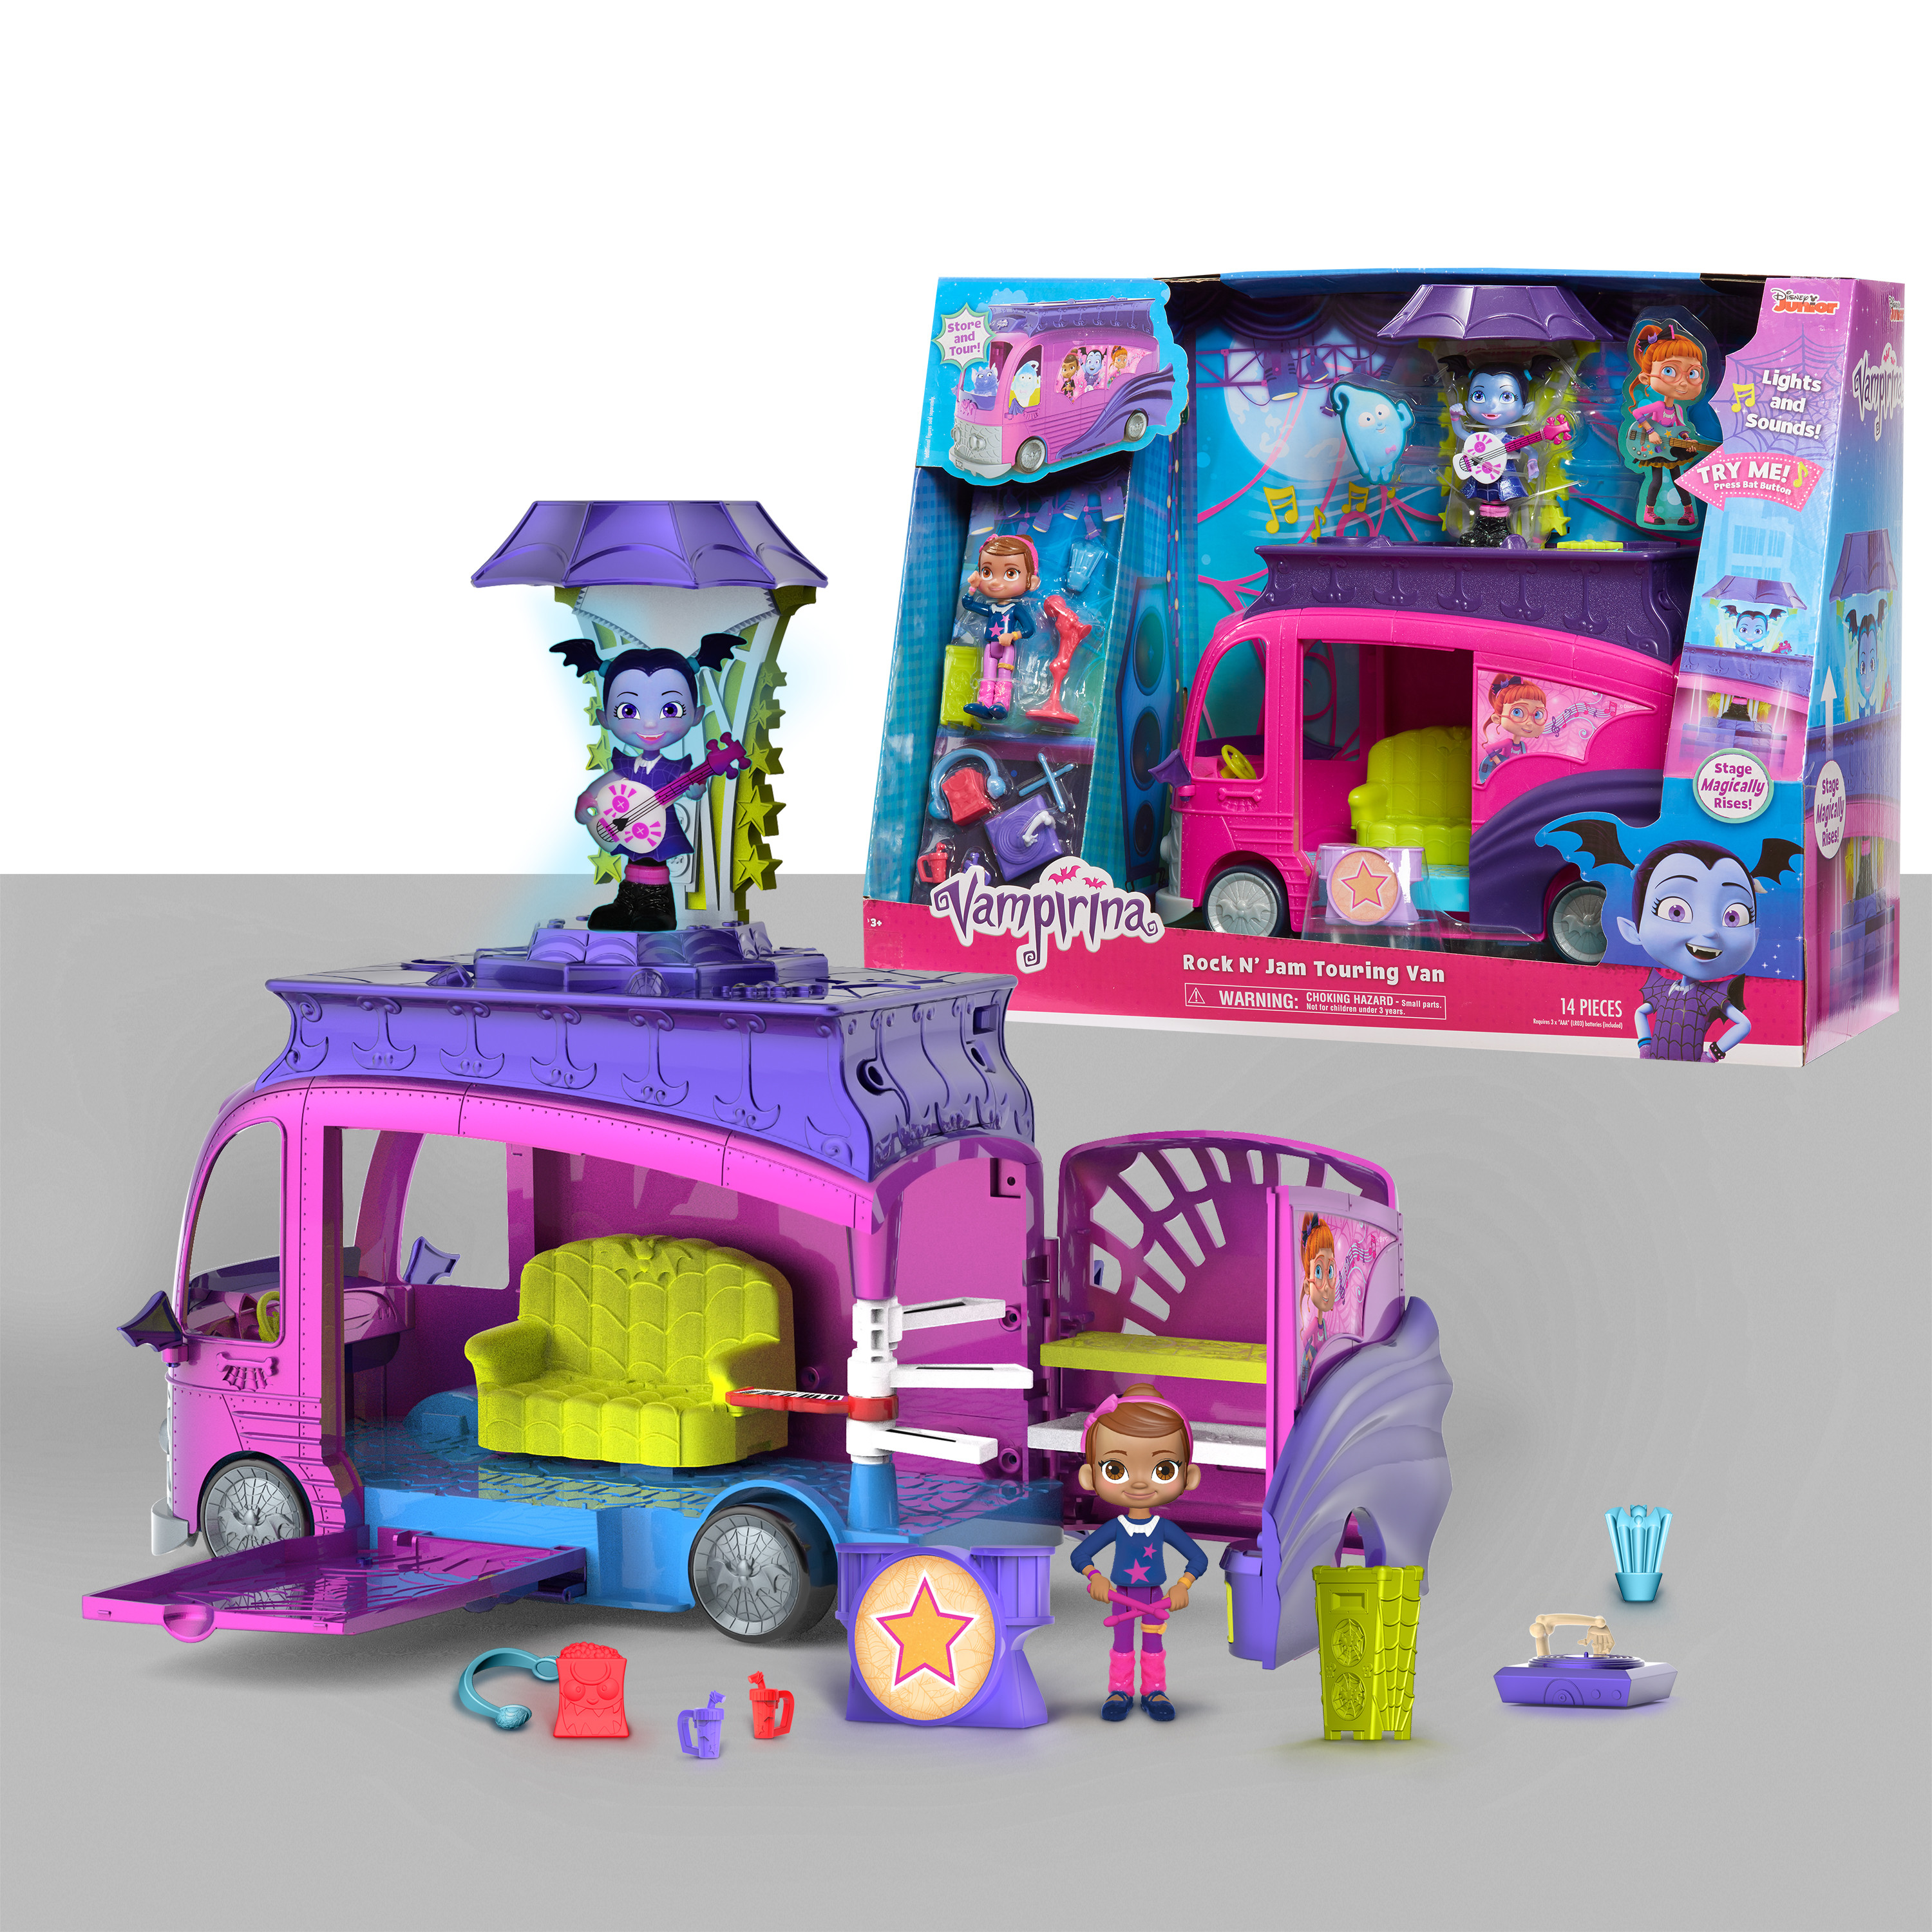 Vampirina Rock N' Jam Touring Van, Officially Licensed Kids Toys for Ages 3 Up, Gifts and Presents - image 1 of 2